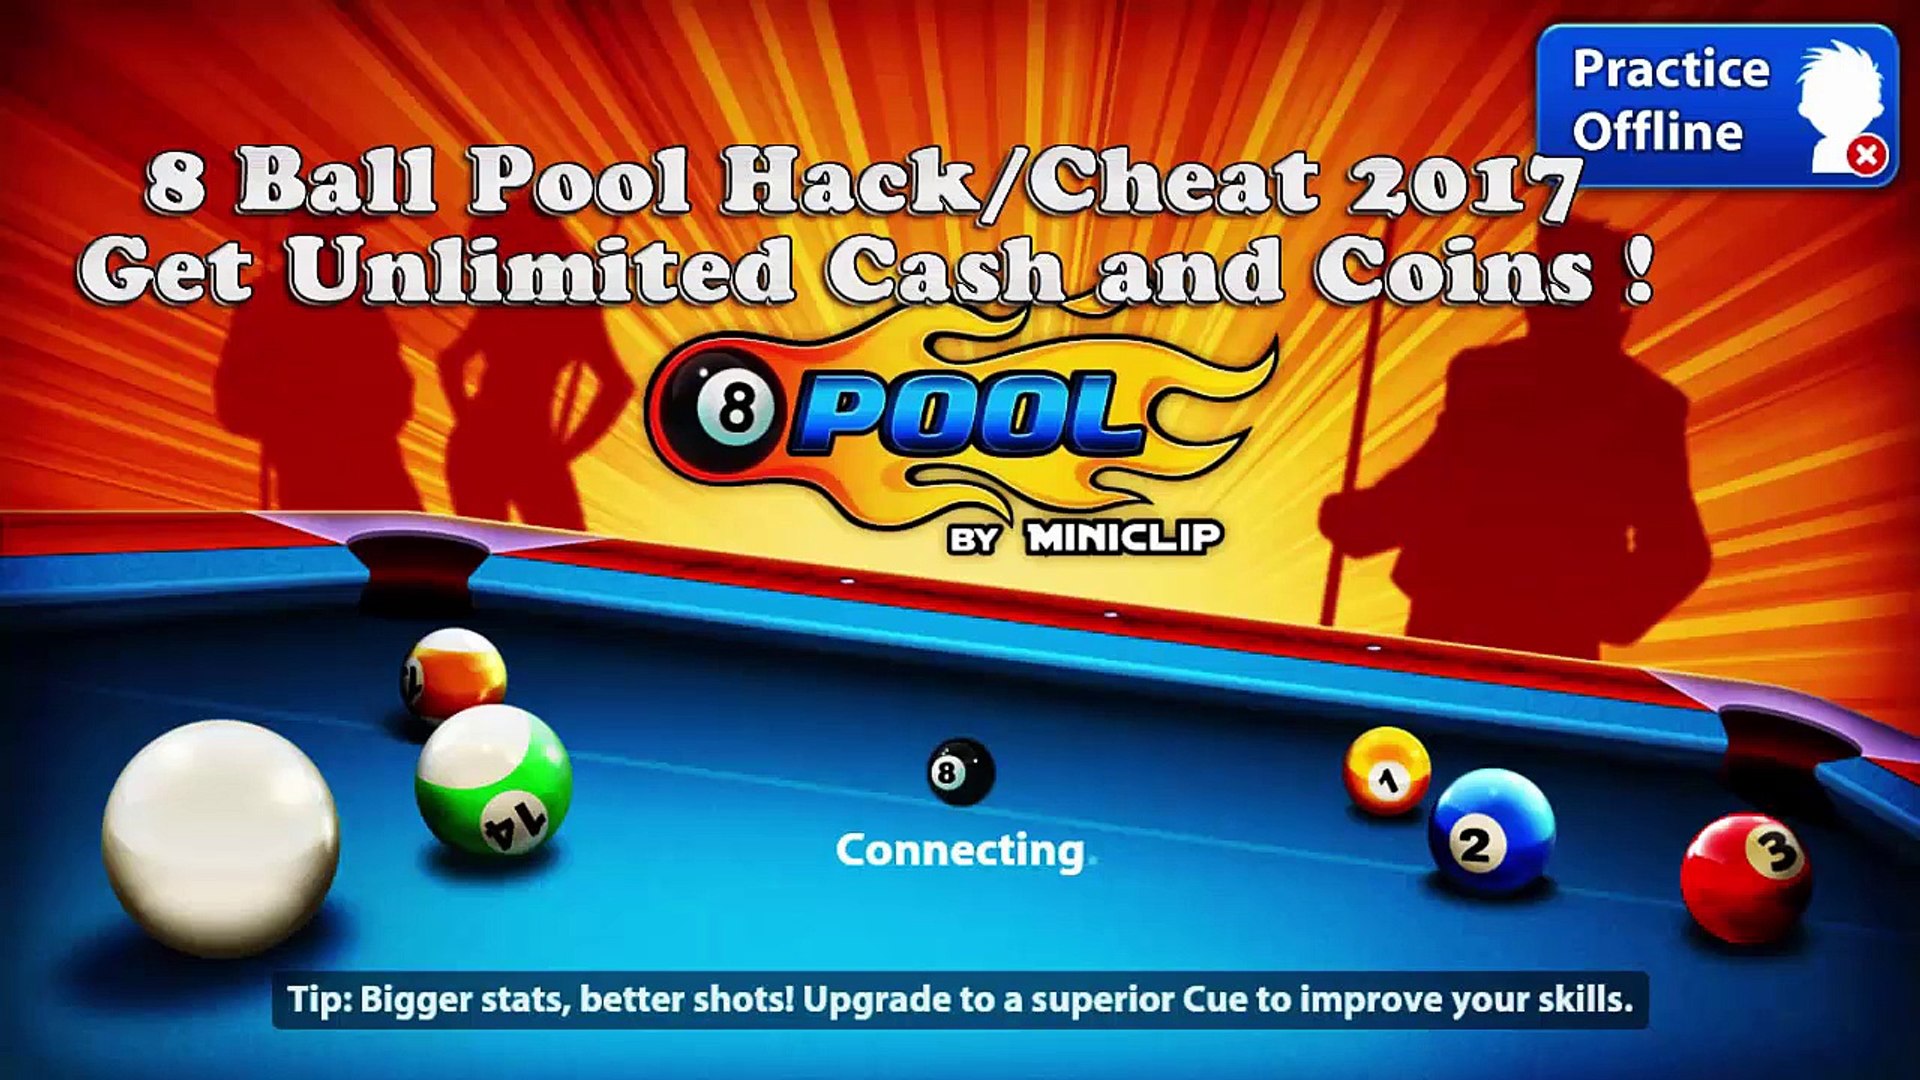 Can You Cheat At 8 Ball Pool